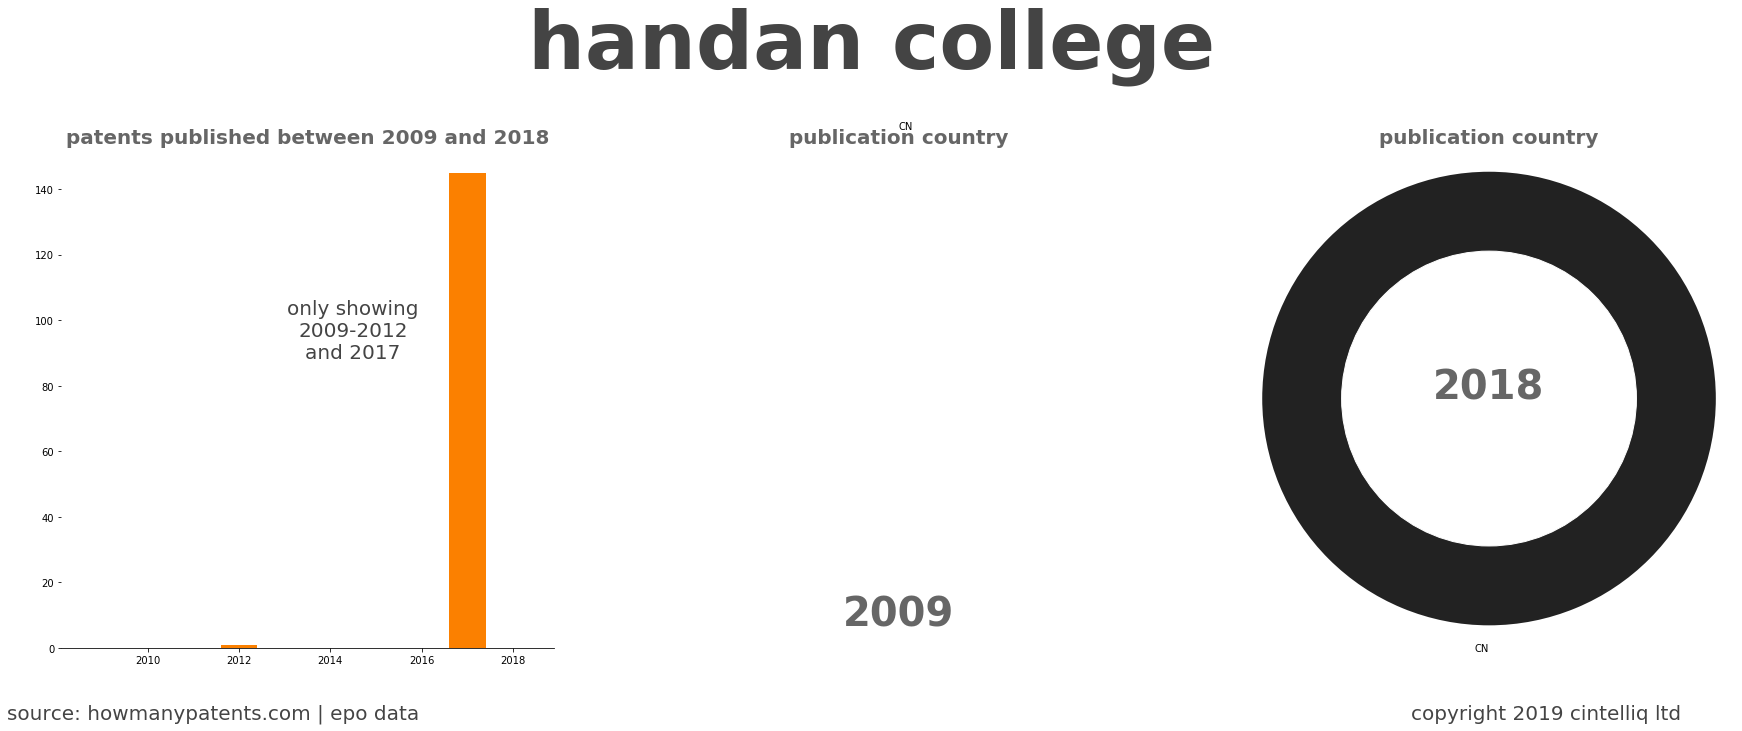 summary of patents for Handan College